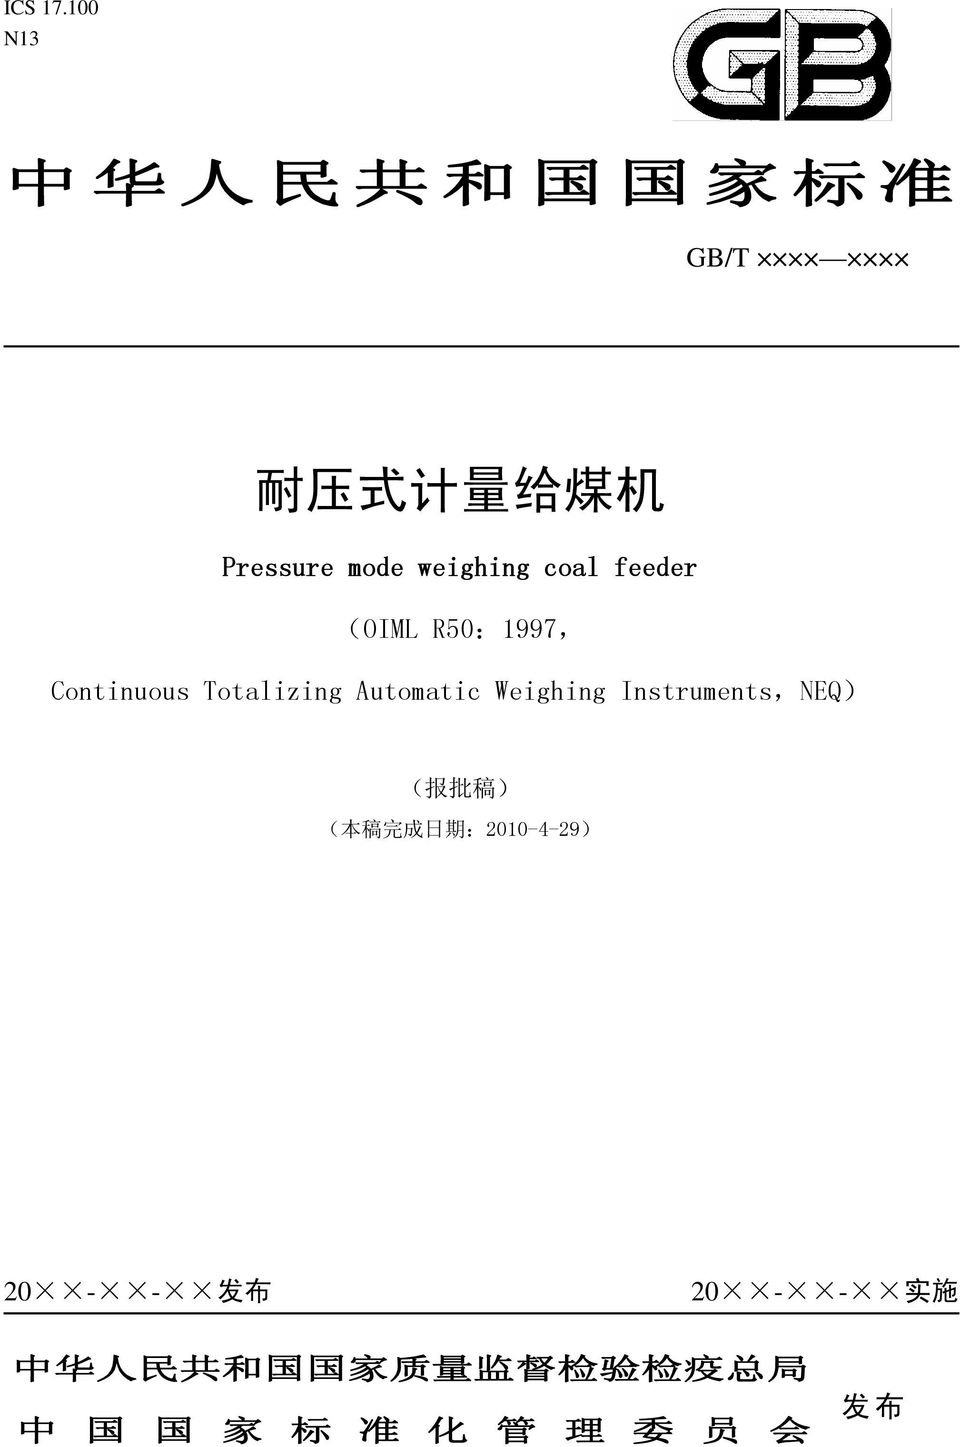 weighing coal feeder (OIML R50:1997, Continuous Totalizing Automatic